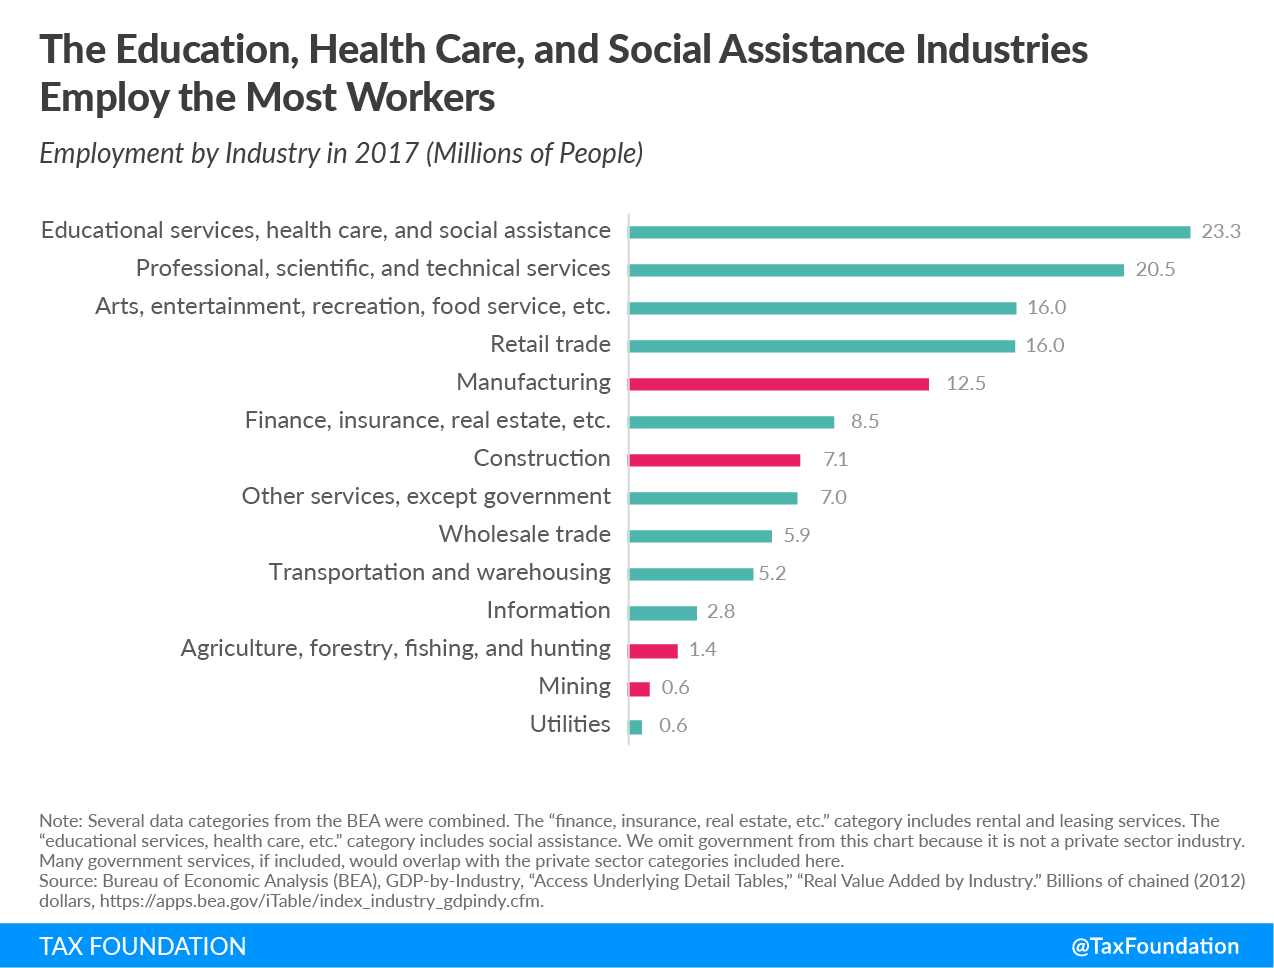 The education, healthcare, social assistance industries employ the most workers, educational services, arts, entertainment, recreation, food service, finance, insurance, real estate, transportation, wholesale trade, agriculture, forestry, fishing, hunting, mining, utilities